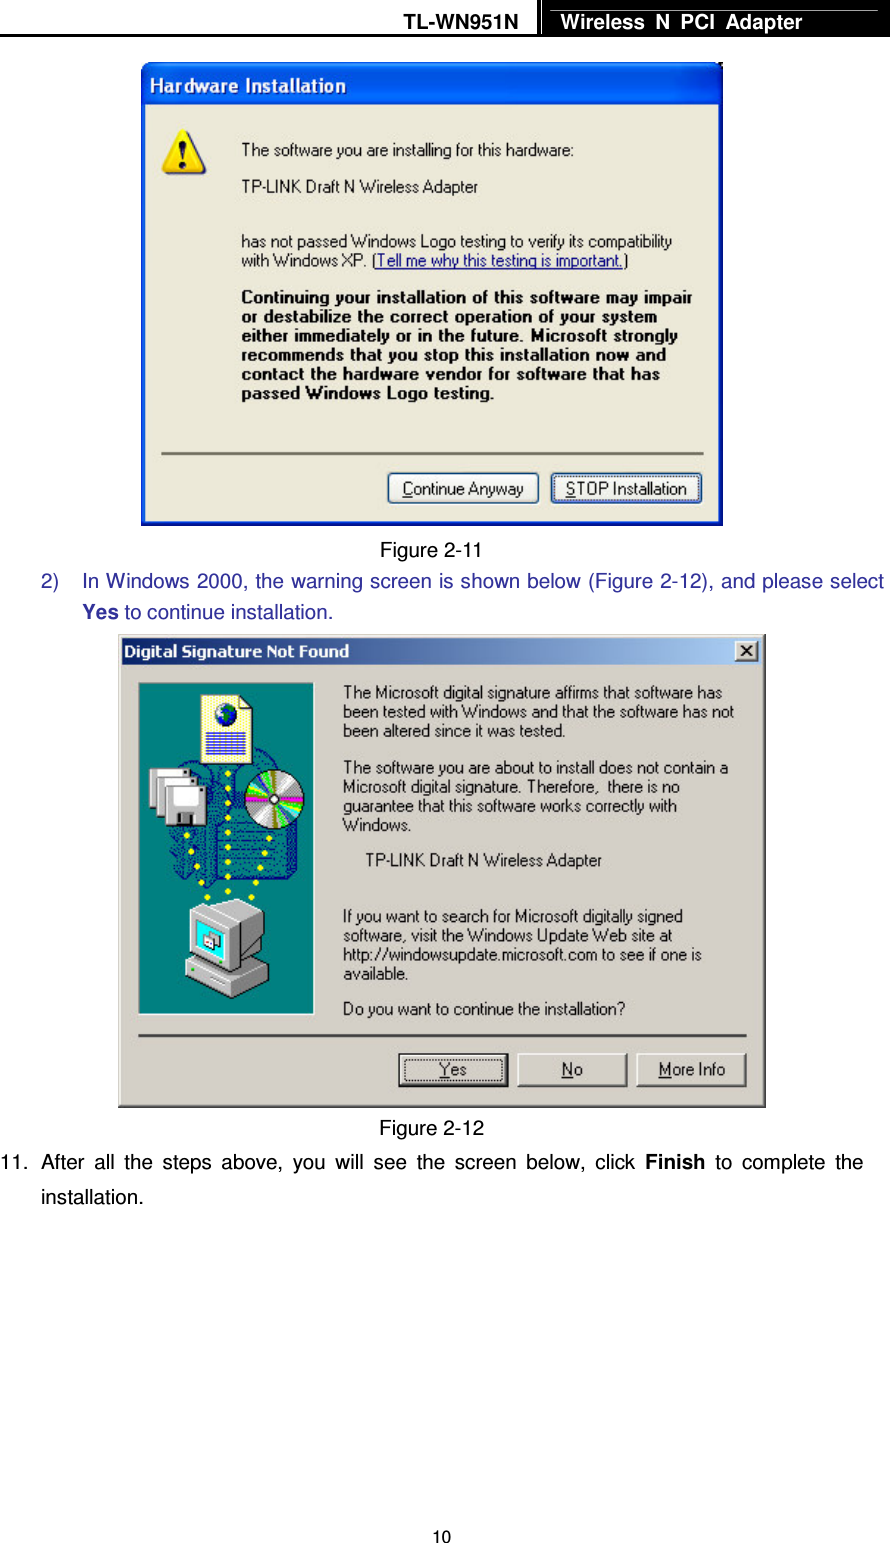 TL-WN951N  Wireless  N  PCI  Adapter   10 Figure 2-11 2)  In Windows 2000, the warning screen is shown below (Figure 2-12), and please select Yes to continue installation.  Figure 2-12 11.  After  all  the  steps  above,  you  will  see  the  screen  below,  click  Finish  to  complete  the installation. 